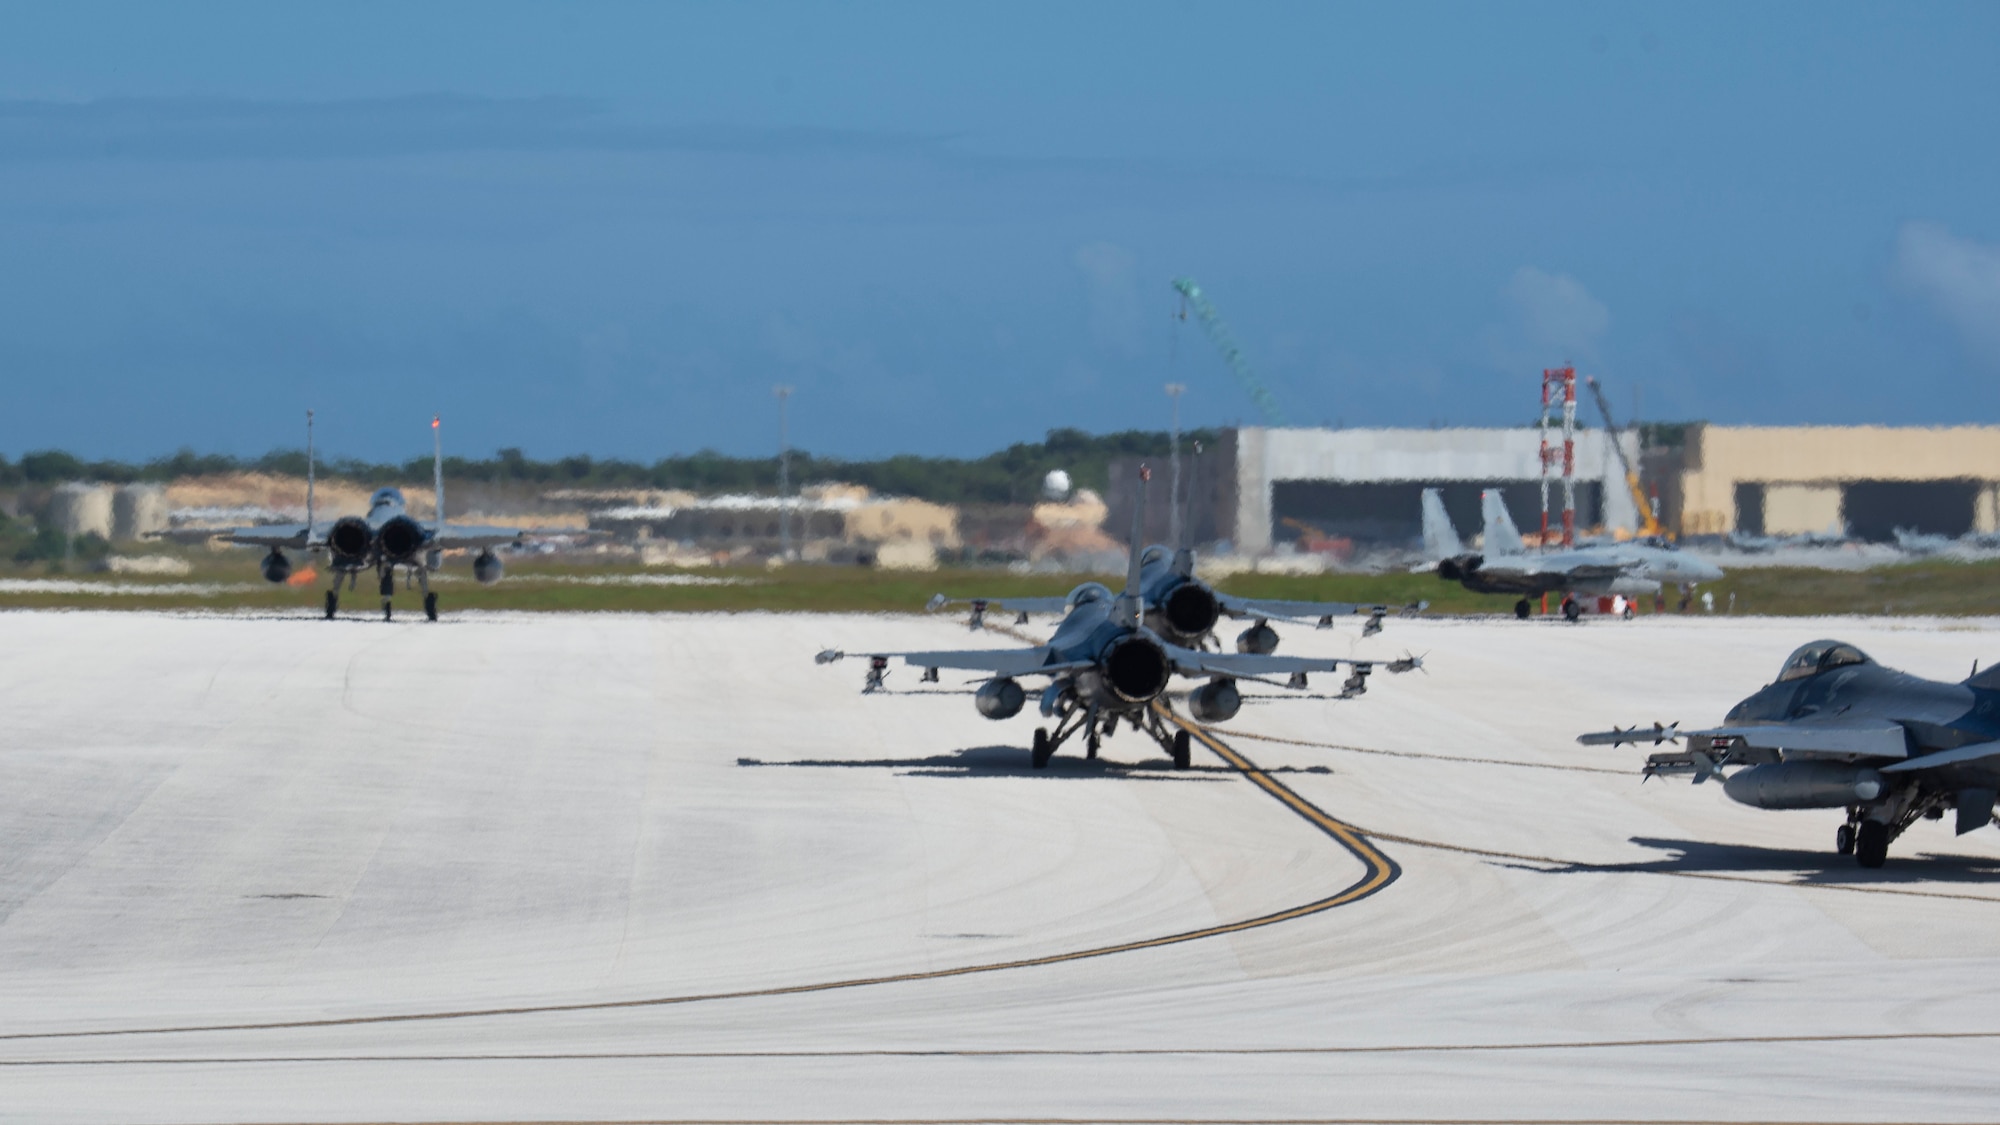 U.S. Air Force F-16CJ Fighting Falcons assigned to 13th Fighter Squadron, Misawa Air Base, Japan, prepare to taxi on the flight line during a group flight line engagement for Exercise Cope North 2021 at Andersen Air Force Base, Guam, Feb. 5, 2021. Exercise Cope North 2021 is an annual U.S. Pacific Air Forces joint/combined, trilateral field training exercise occurring Feb. 3-19, 2021. The exercise includes participants from the U.S. Air Force, U.S. Navy, U.S. Marine Corps, Japan Air Self-Defense Force and Royal Australian Air Force conducted primarily at Andersen AFB. (U.S. Air Force photo by Senior Airman Aubree Owens)